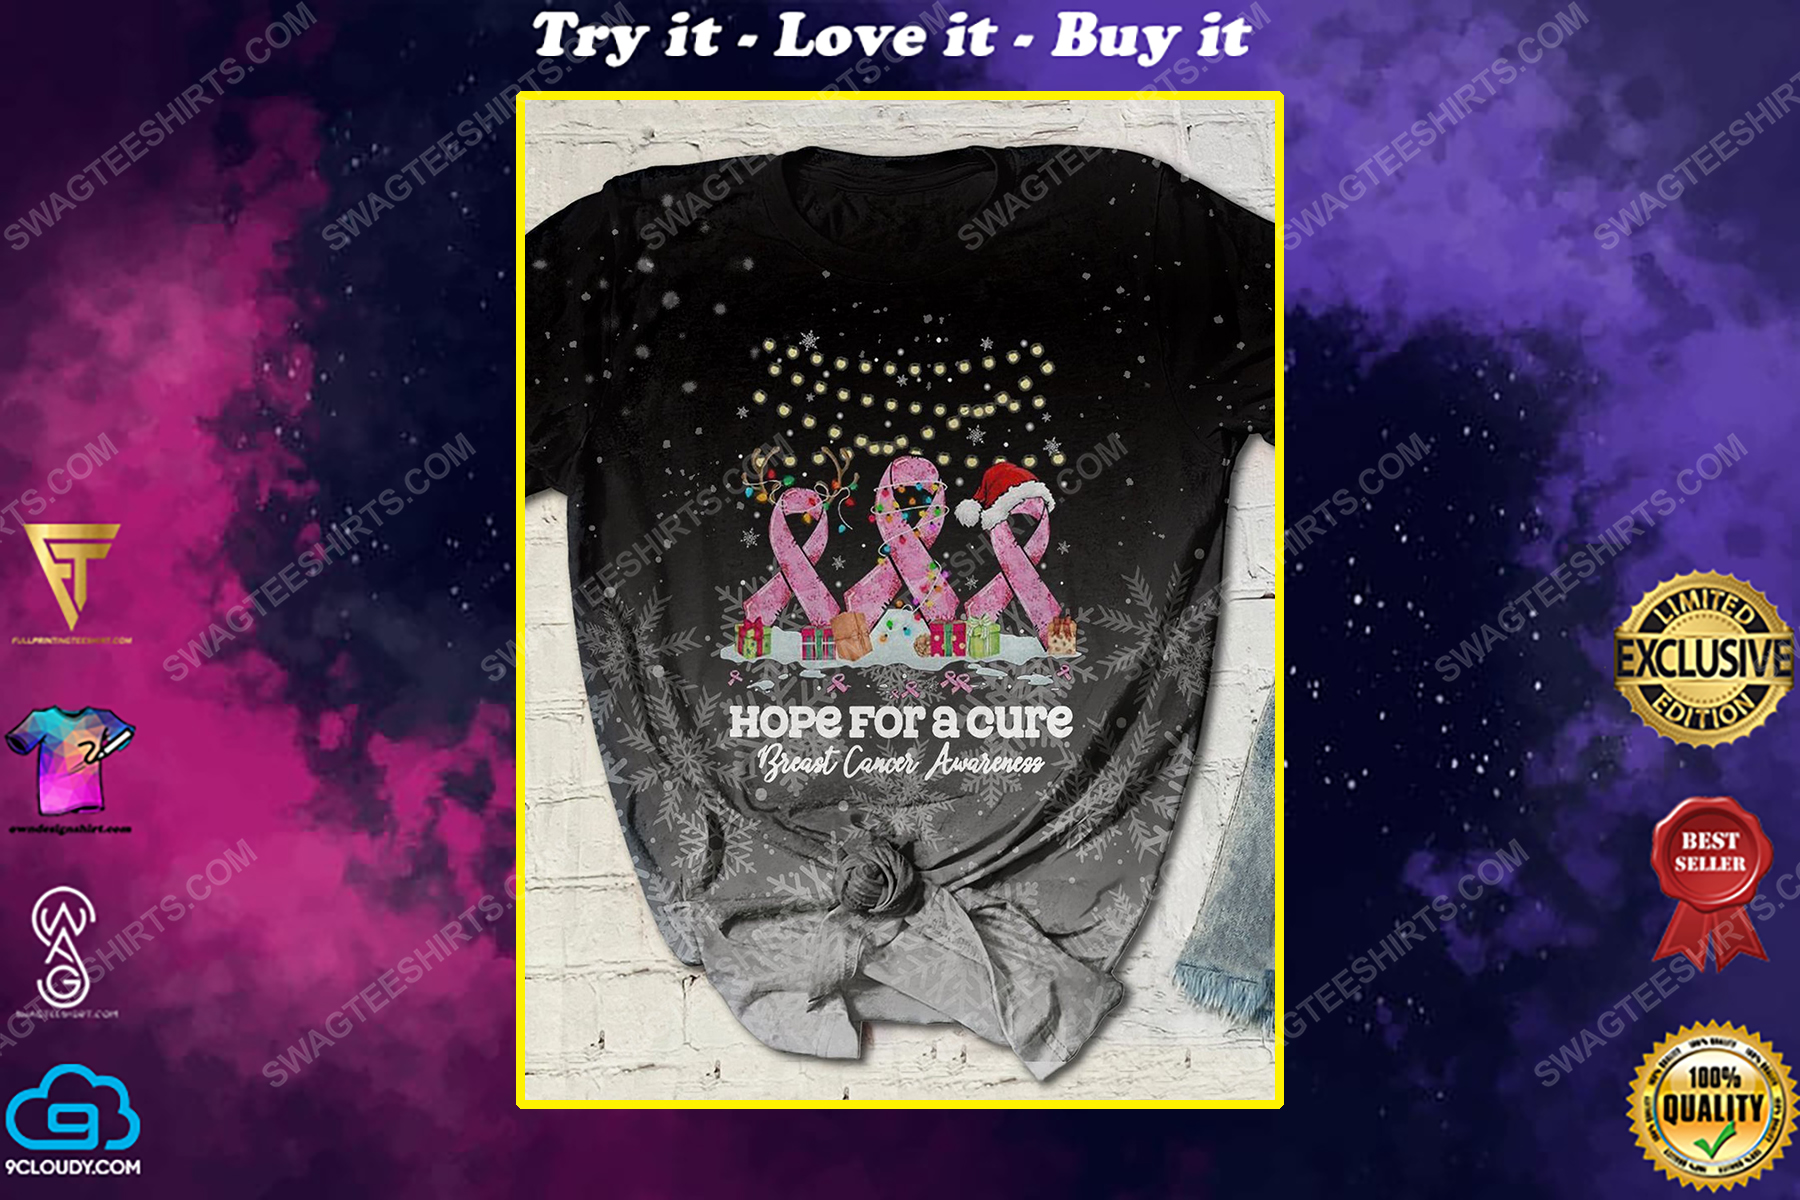 Breast cancer awareness hope for a cure full print shirt